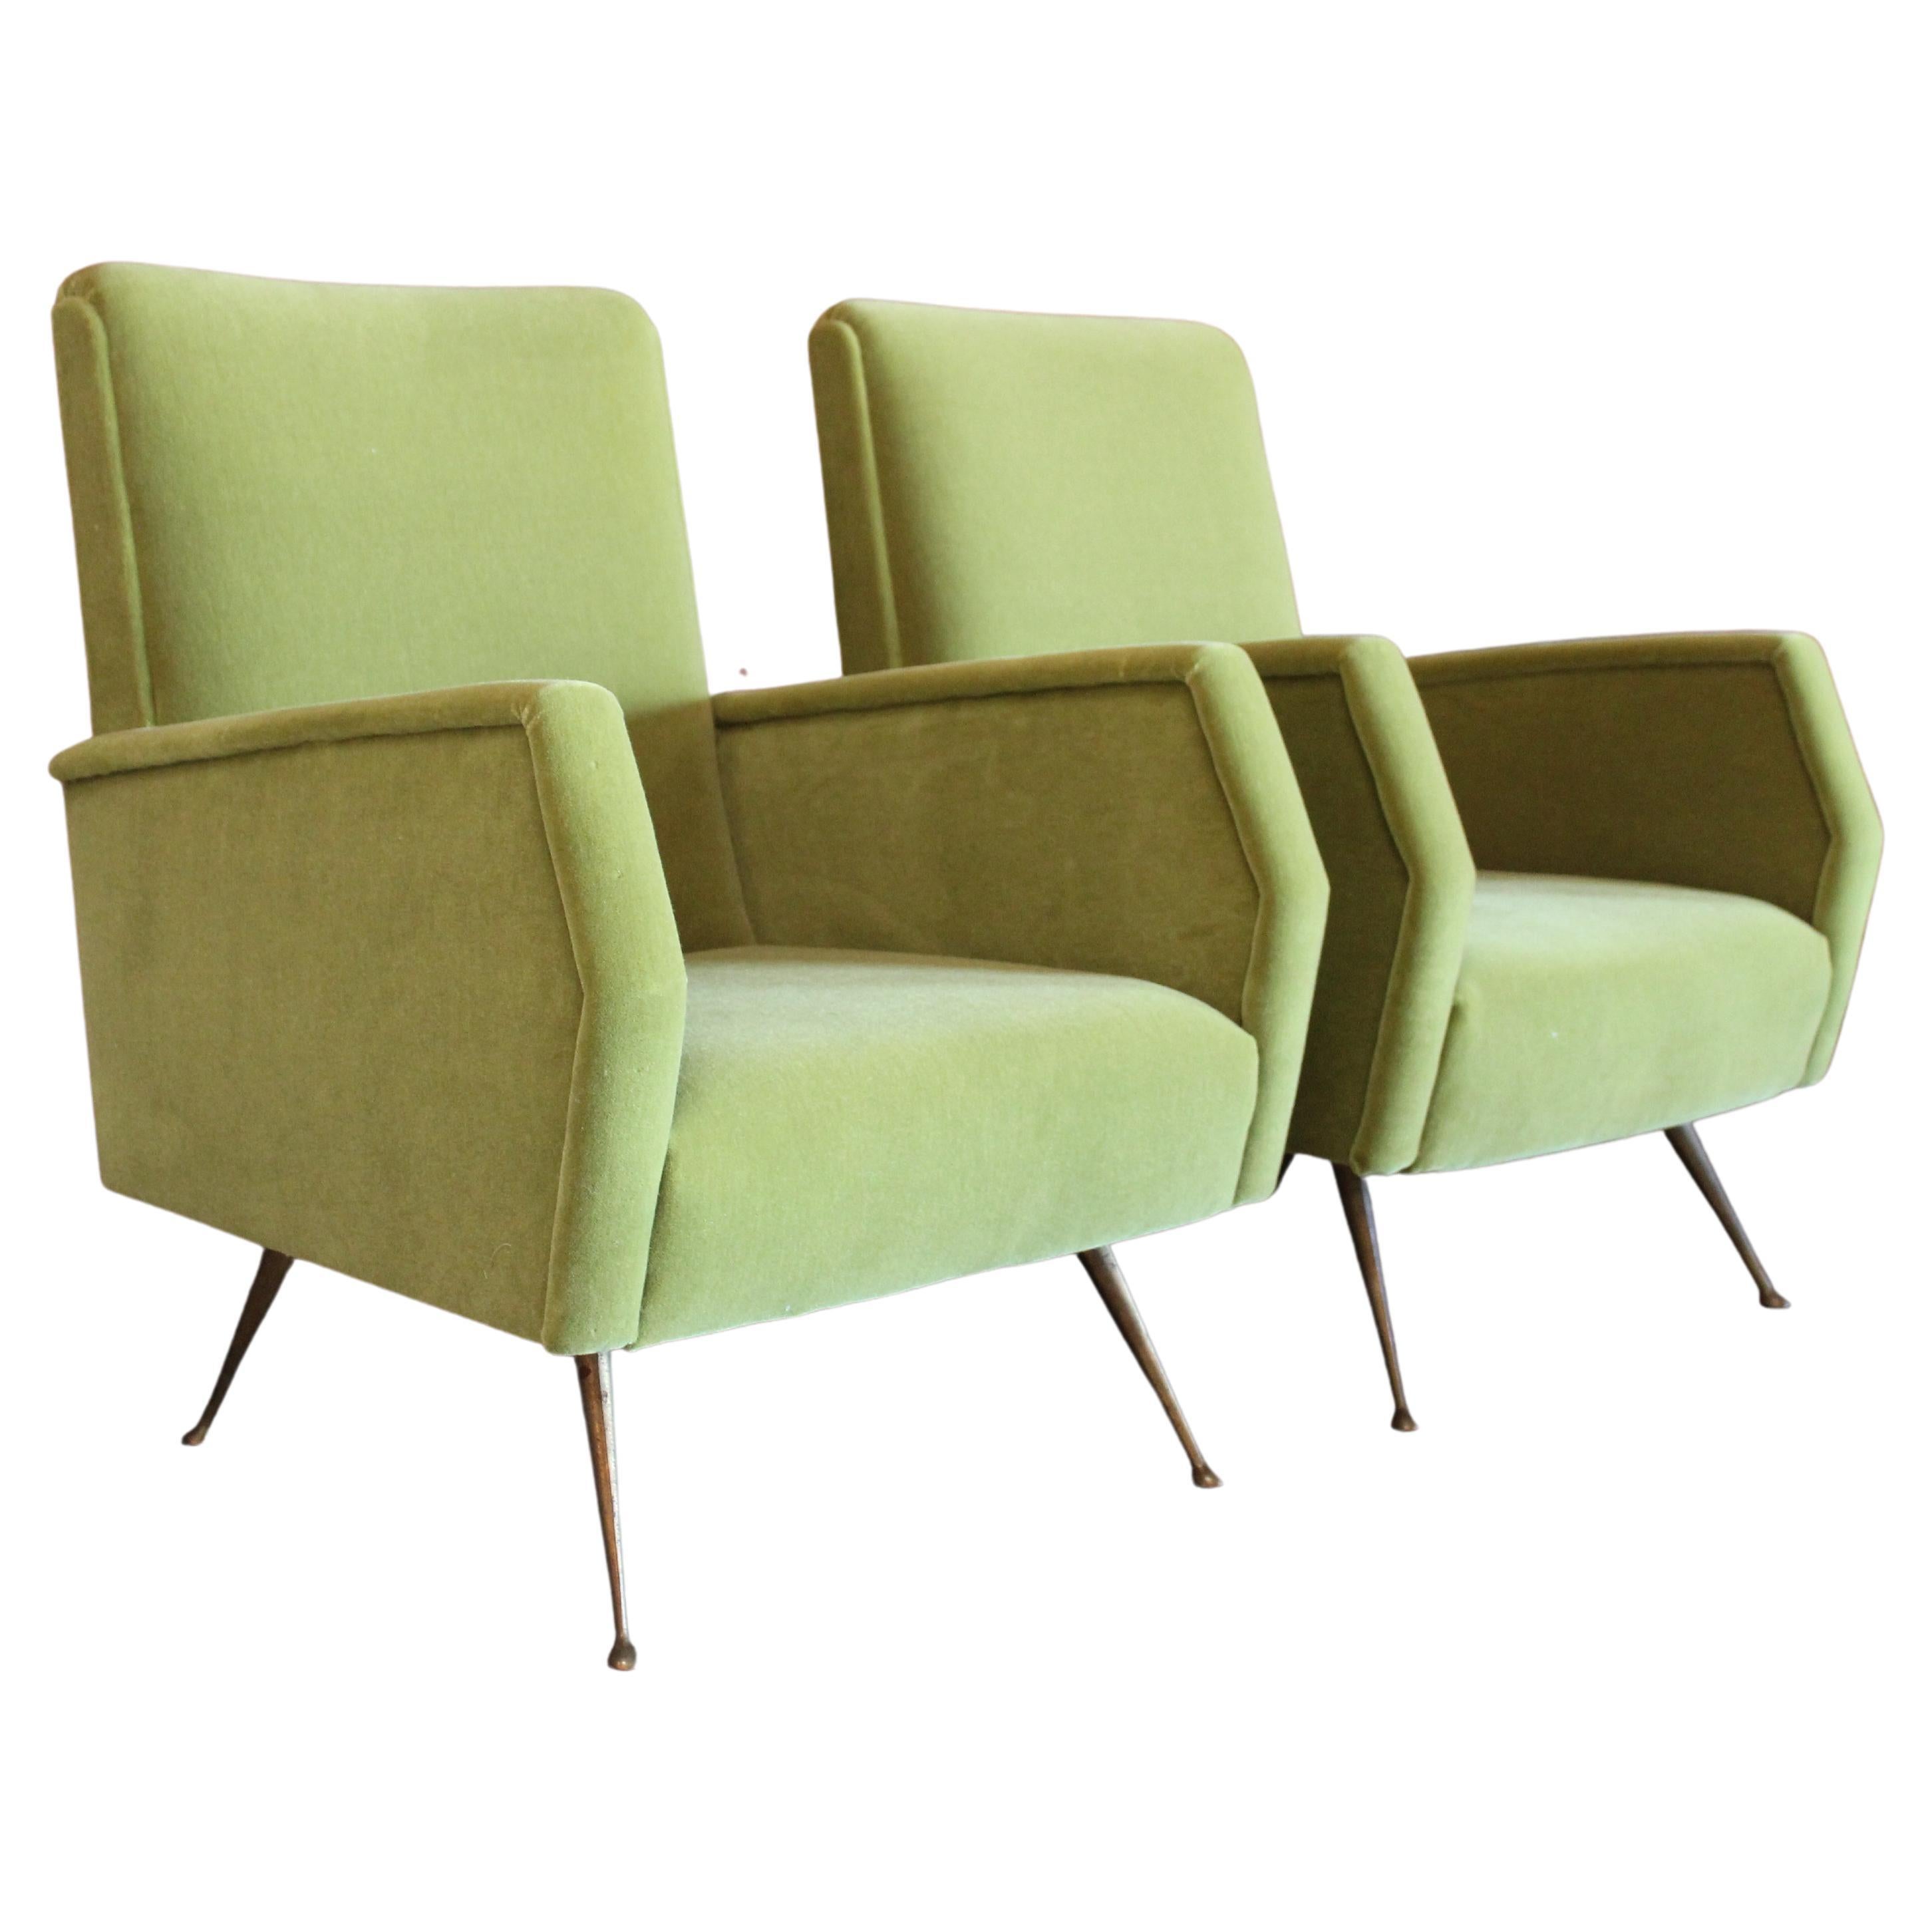 Pair of 1950s Italian Lounge Chairs in New Mohair Upholstery